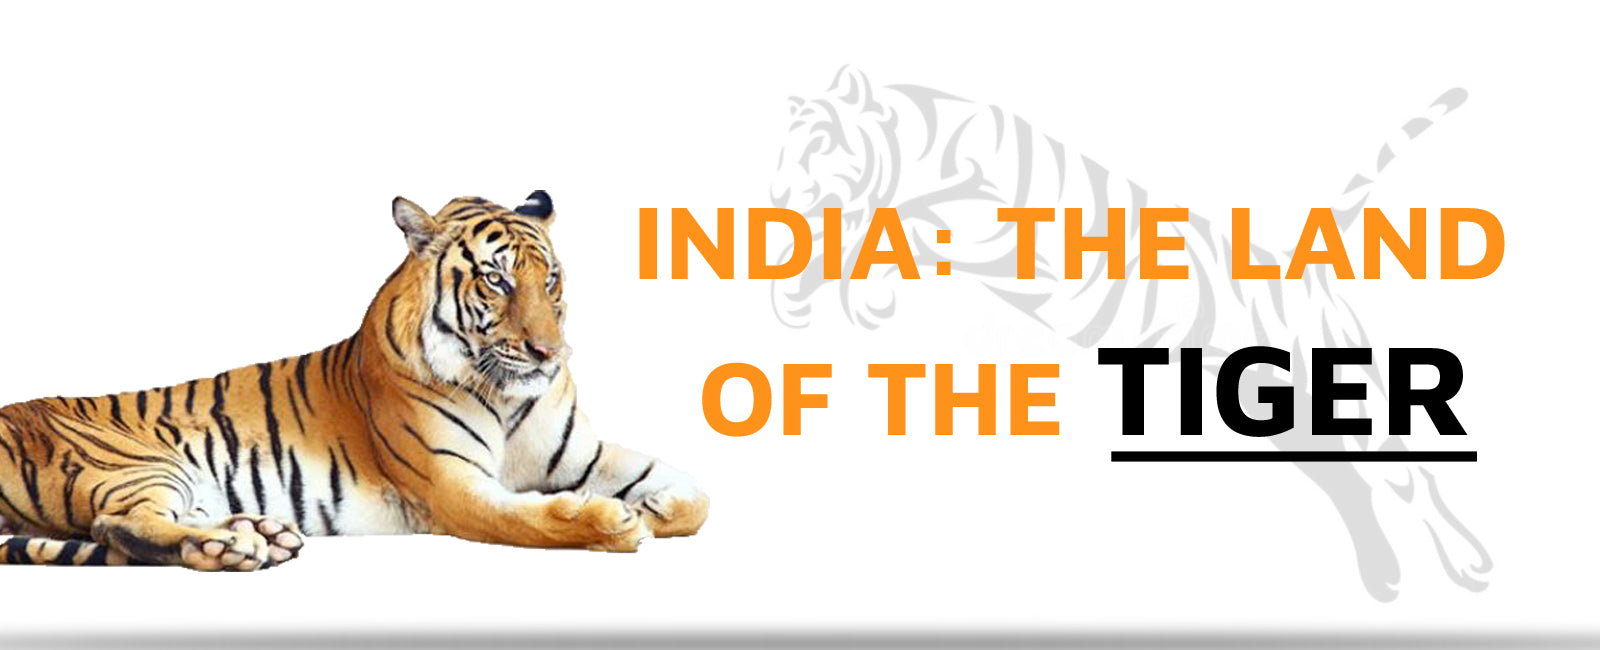 India: The Land of the Tiger